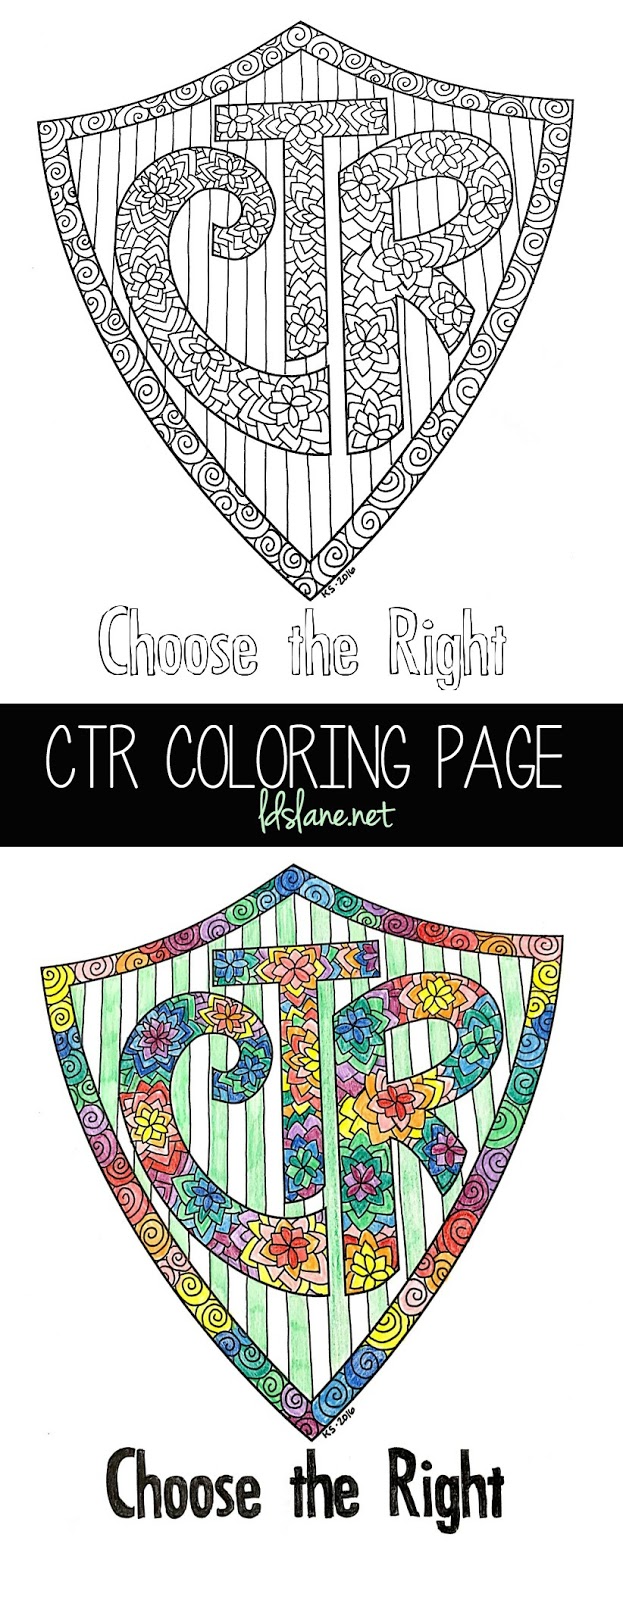 Ctr coloring page